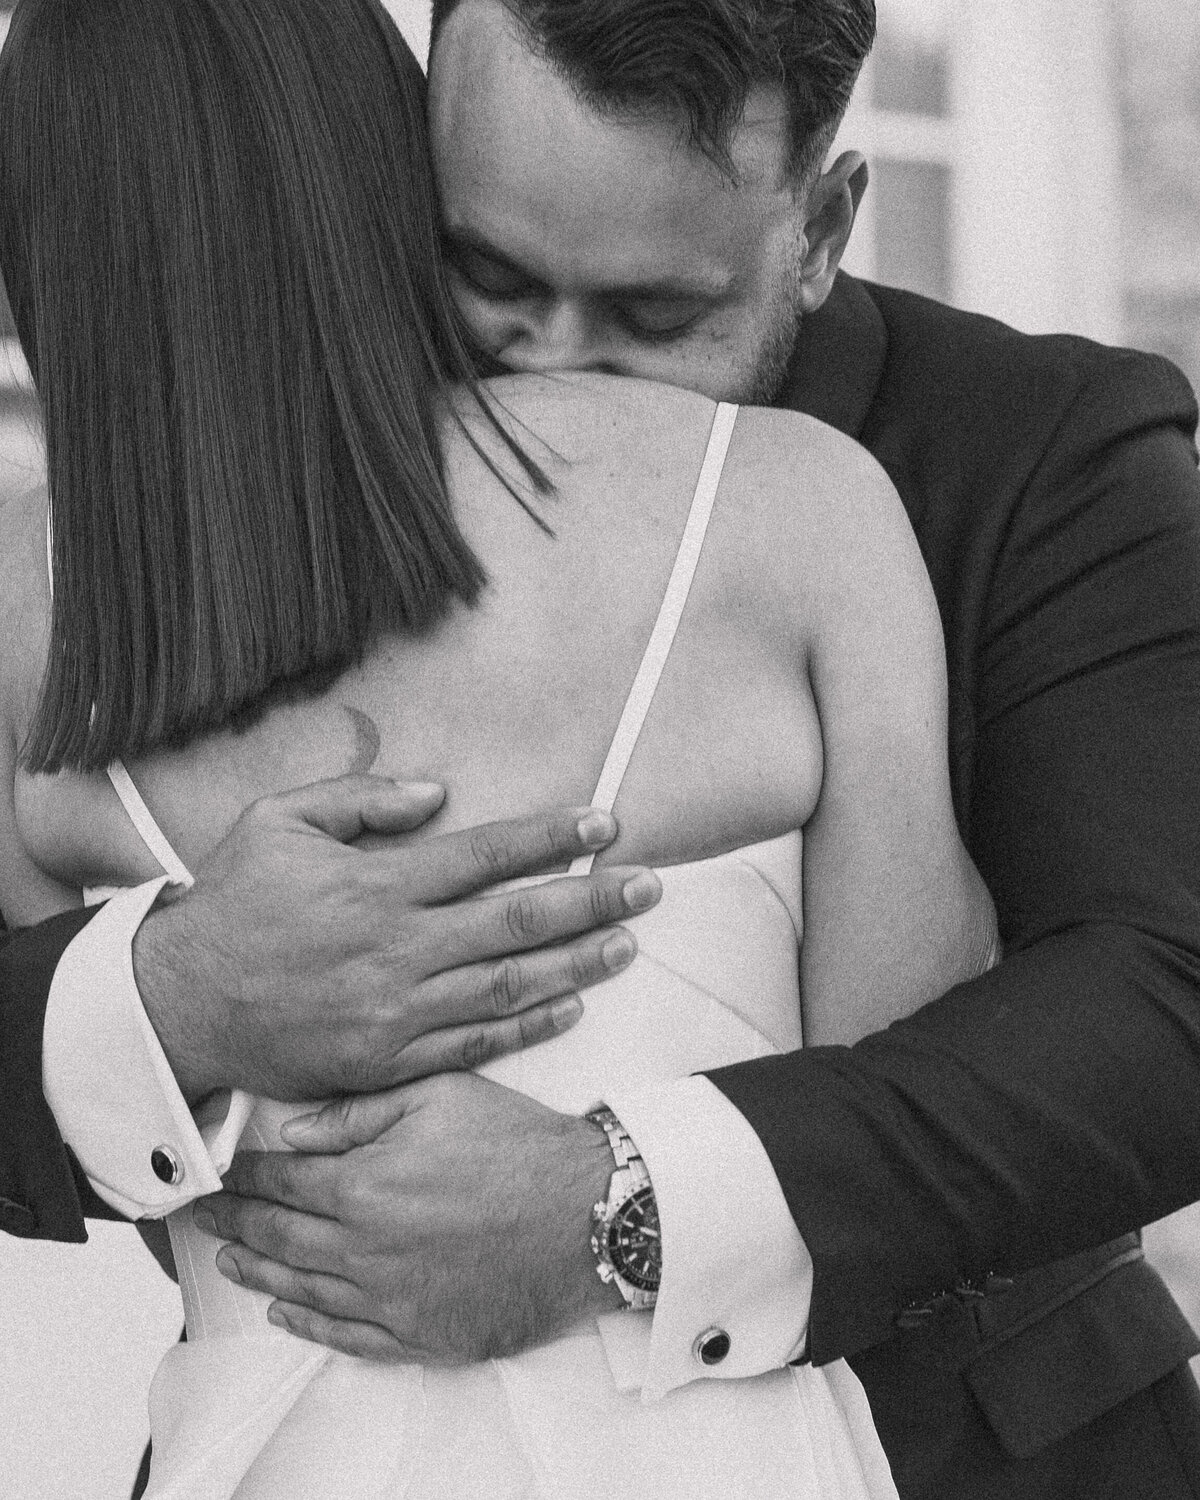 Intimate black and white close-up of a wedding couple embracing. The groom, dressed in a suit, tenderly hugs the bride, who wears a sleeveless dress. The groom's face is nestled against the bride's shoulder, conveying deep emotion and affection. His hands, adorned with a watch and cufflinks, rest gently on her back, capturing a moment of closeness and love.